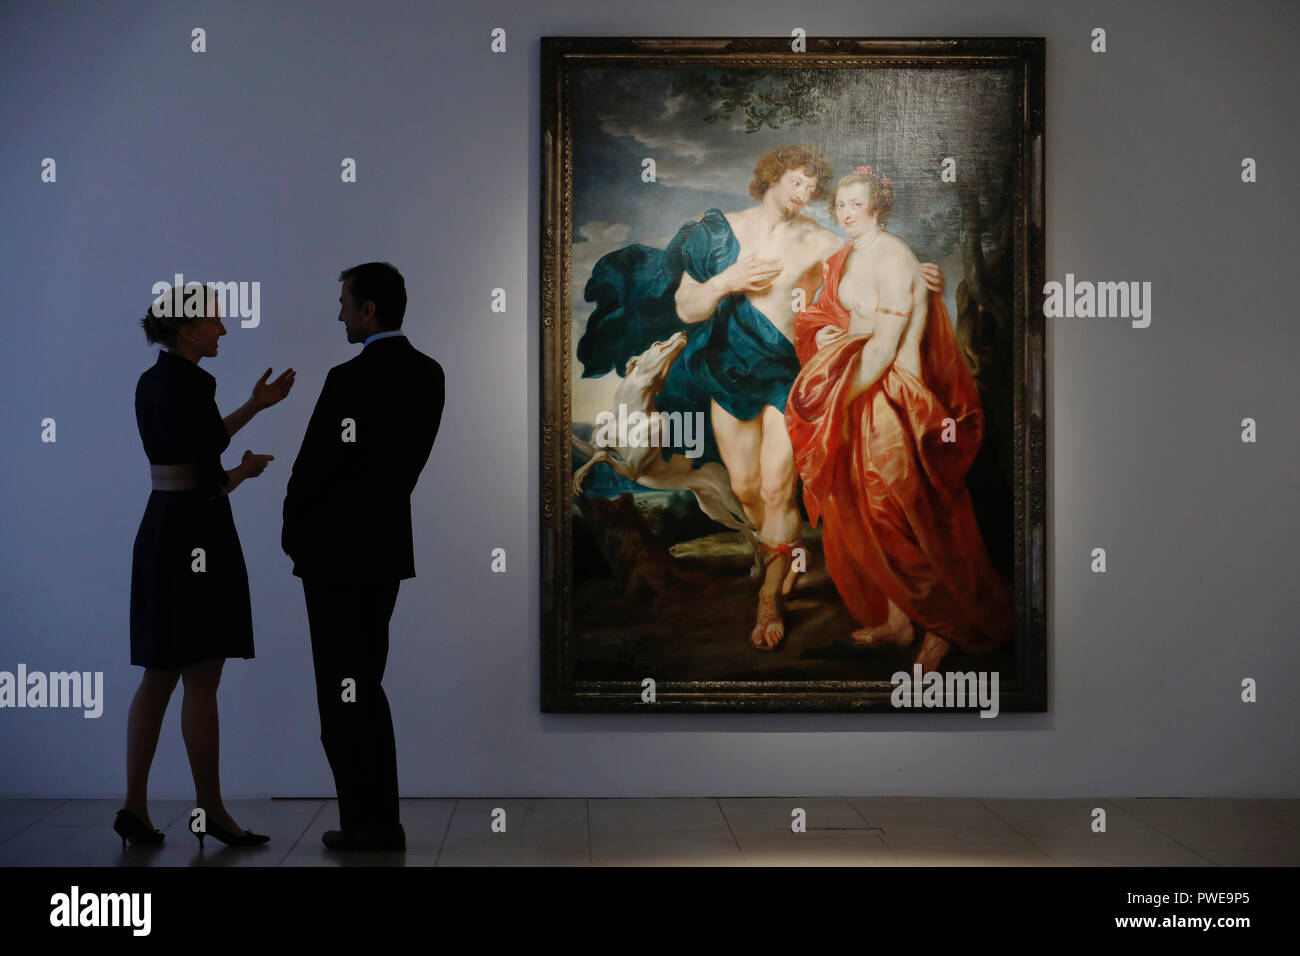 London, UK, 16th Oct 2018. Christie's employees discuss Dutch master Anthony Van Dyck 's work 'Venus and Adonis' at Christie's AuctionHouse in London, UK, Tuesday October 16, 2017. The piece is expected to achieve up to £3.5million when is comes to auction as part of the Albada Jelgersma Collection sale during Christie's Classic Week in December. Photograph : Credit: Luke MacGregor/Alamy Live News Stock Photo